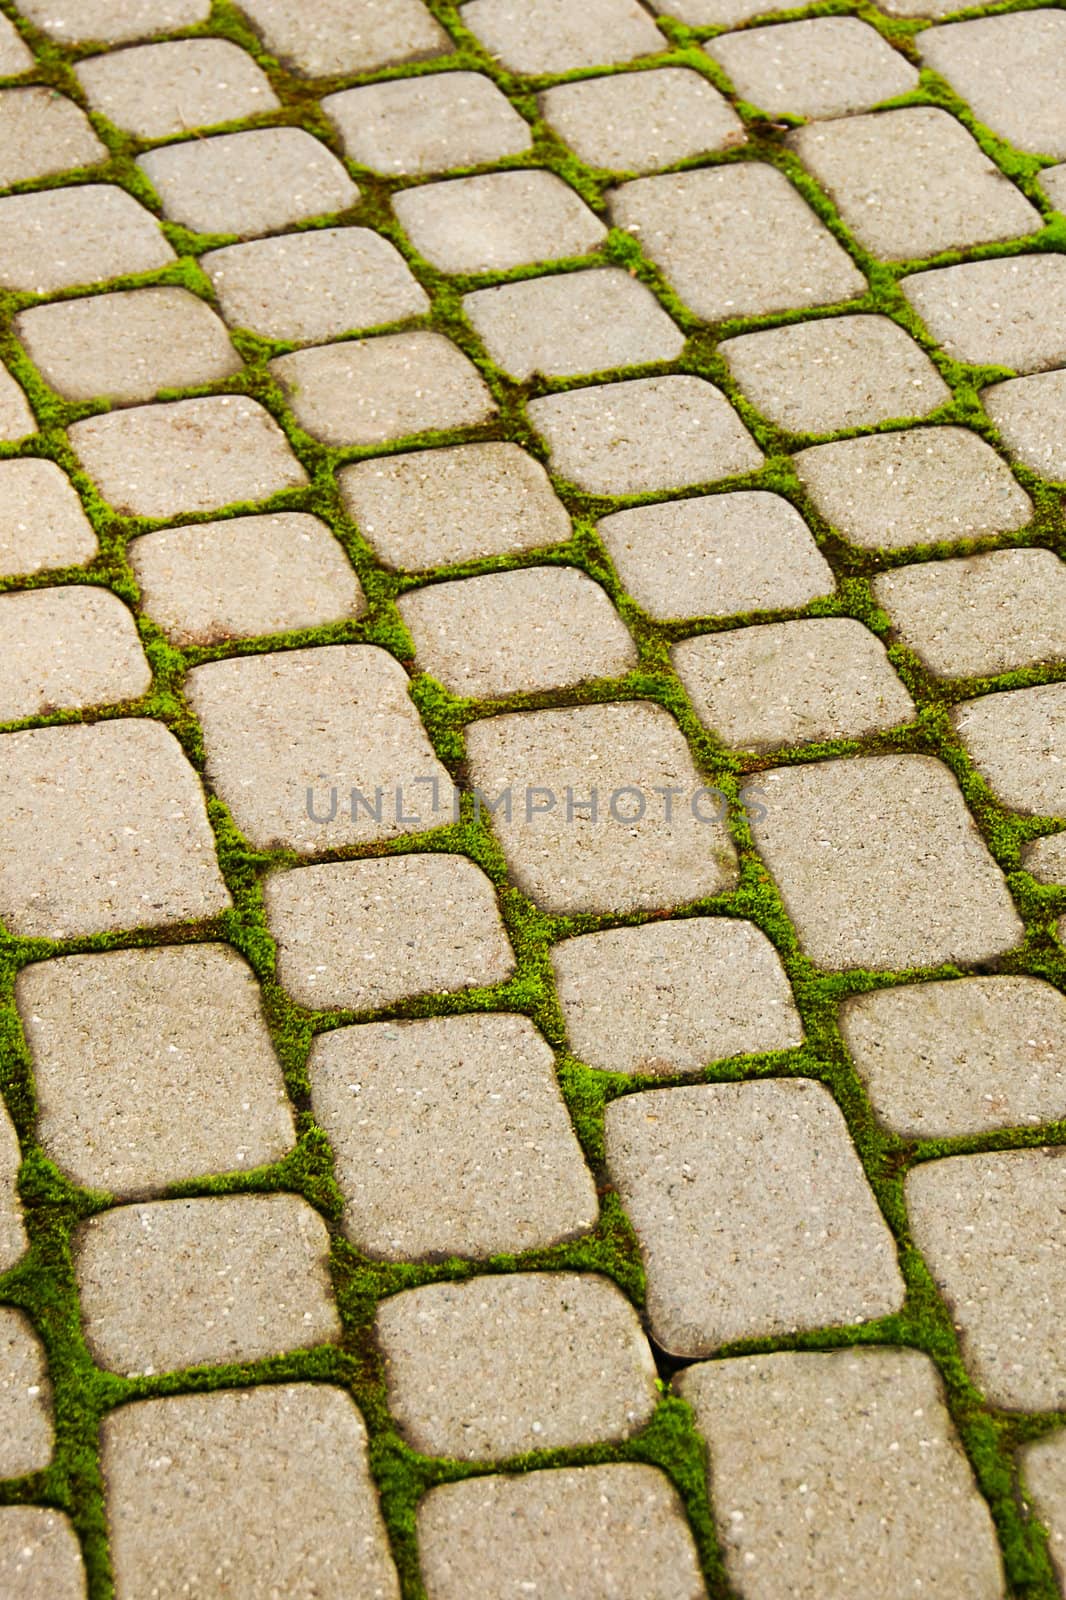 Grey tile with the sprouted green grass